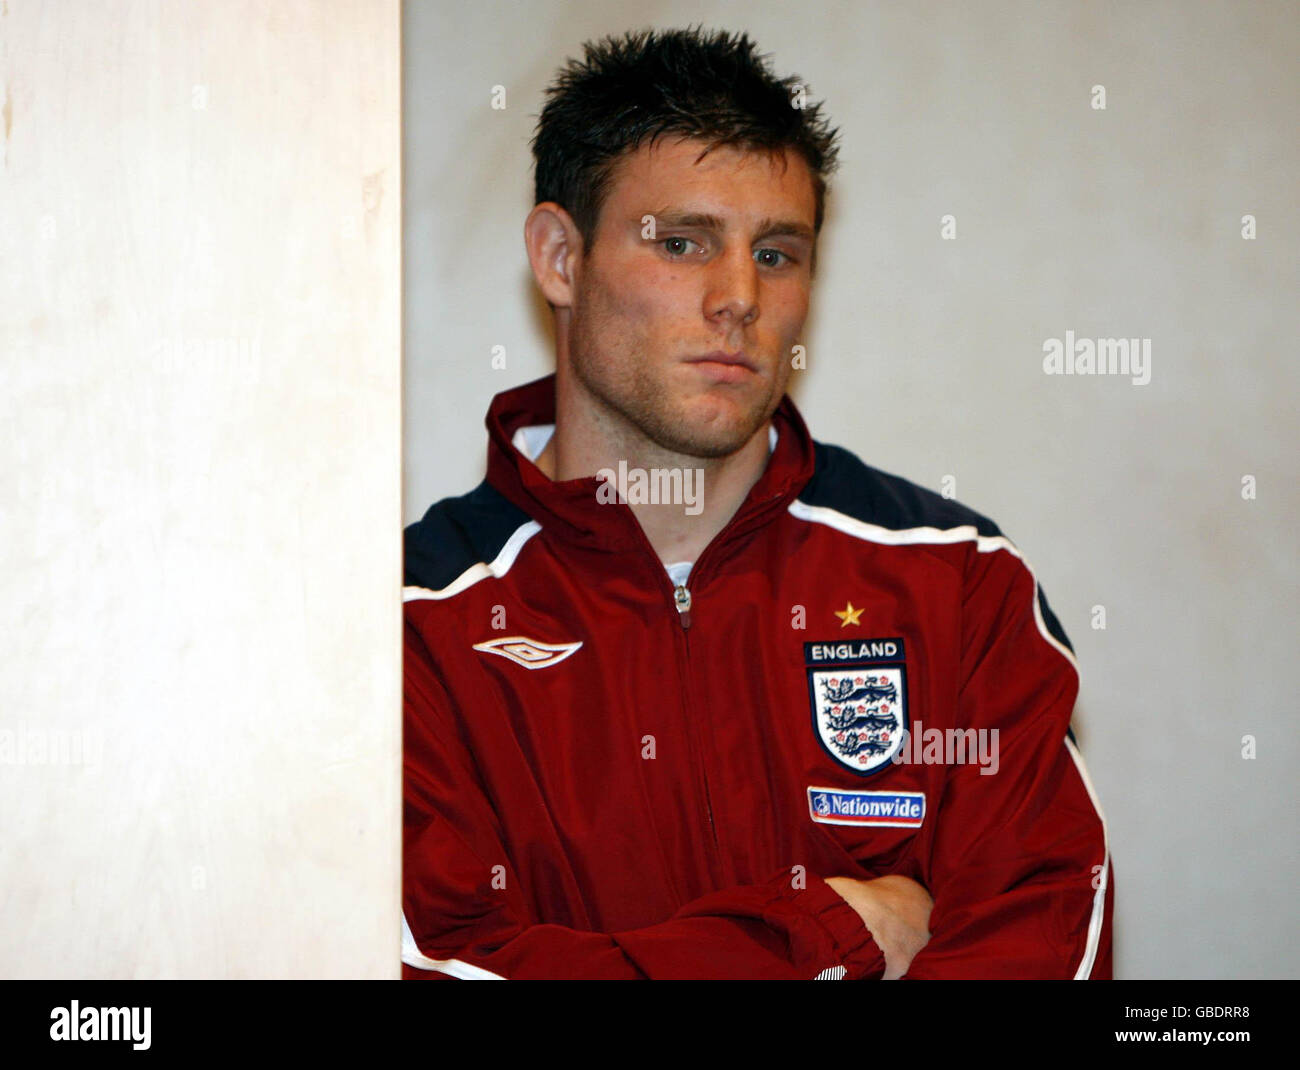 Soccer - England Press Conference - Grove Hotel. England's James Milner during a press conference at The Grove Hotel, Hertfordshire. Stock Photo